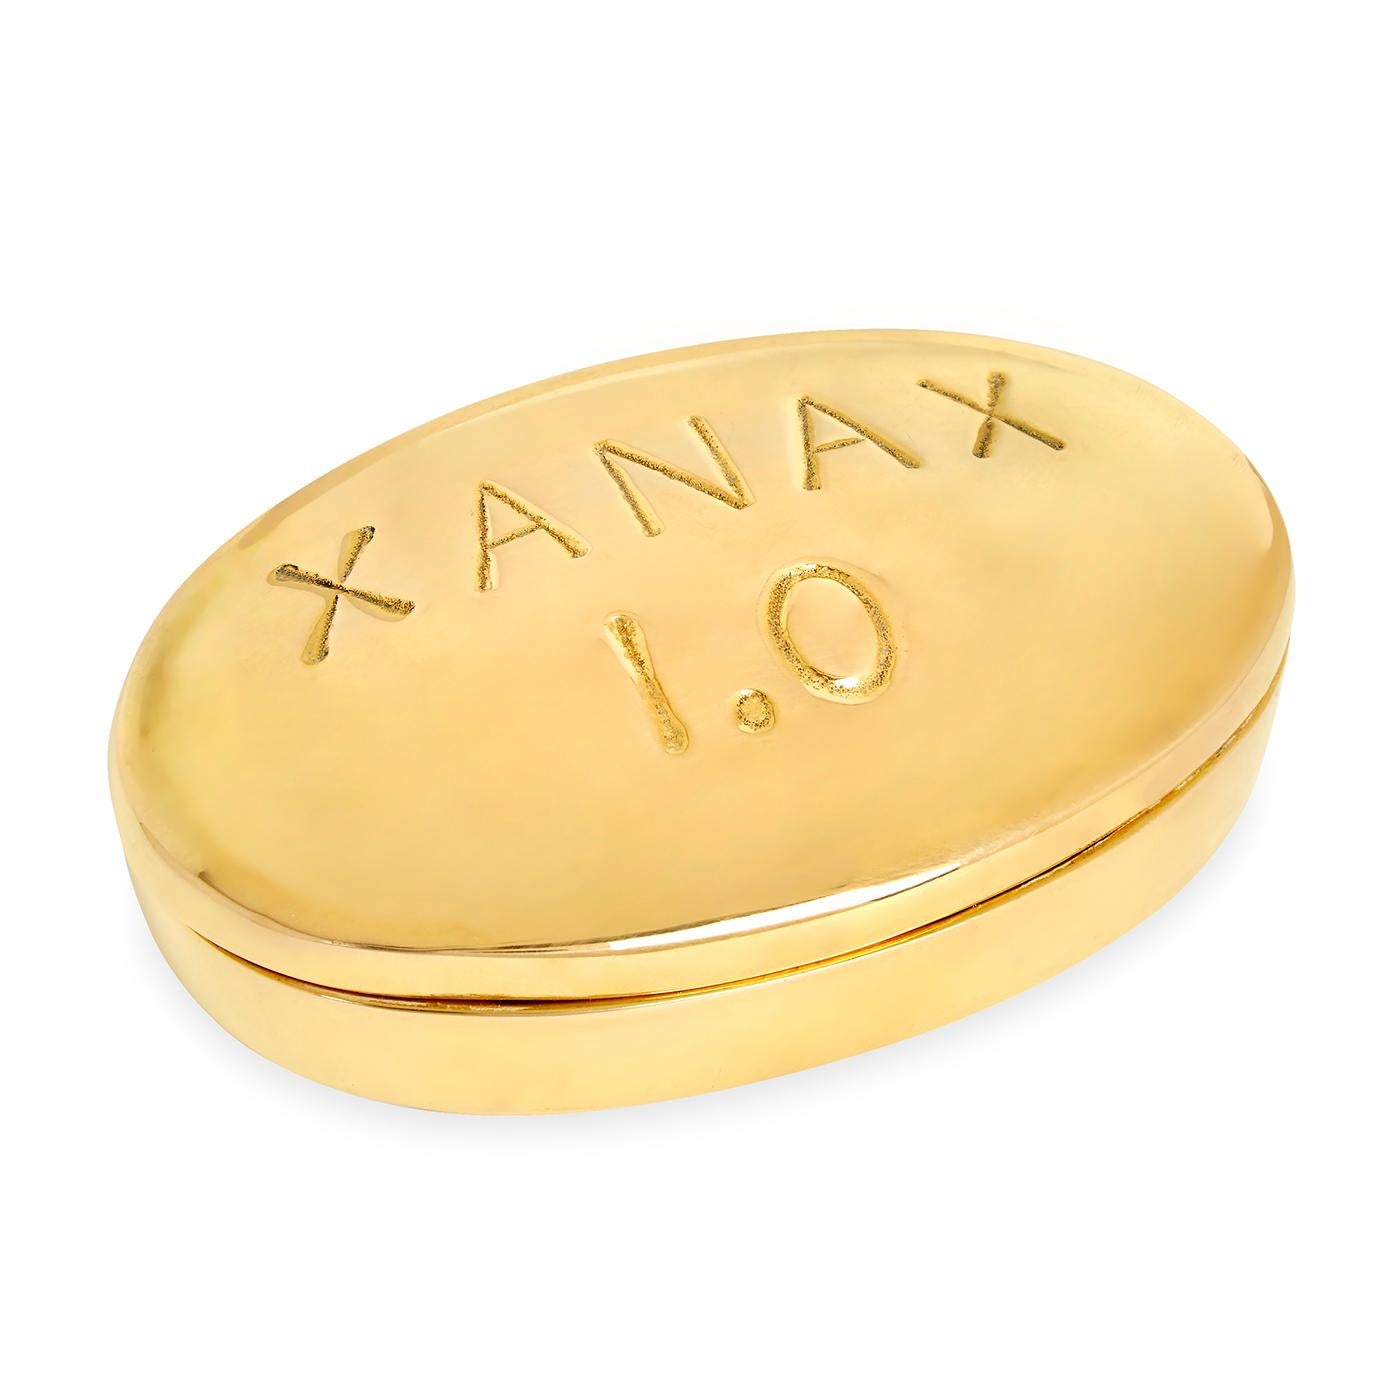 A dose of style. We've taken our long time love of pharmaceuticals to a new level of luxe. Cast in solid brass, our hinged pill boxes are the perfect place to stash your stash. Each pill is laser-etched with its mg size so you can manage your